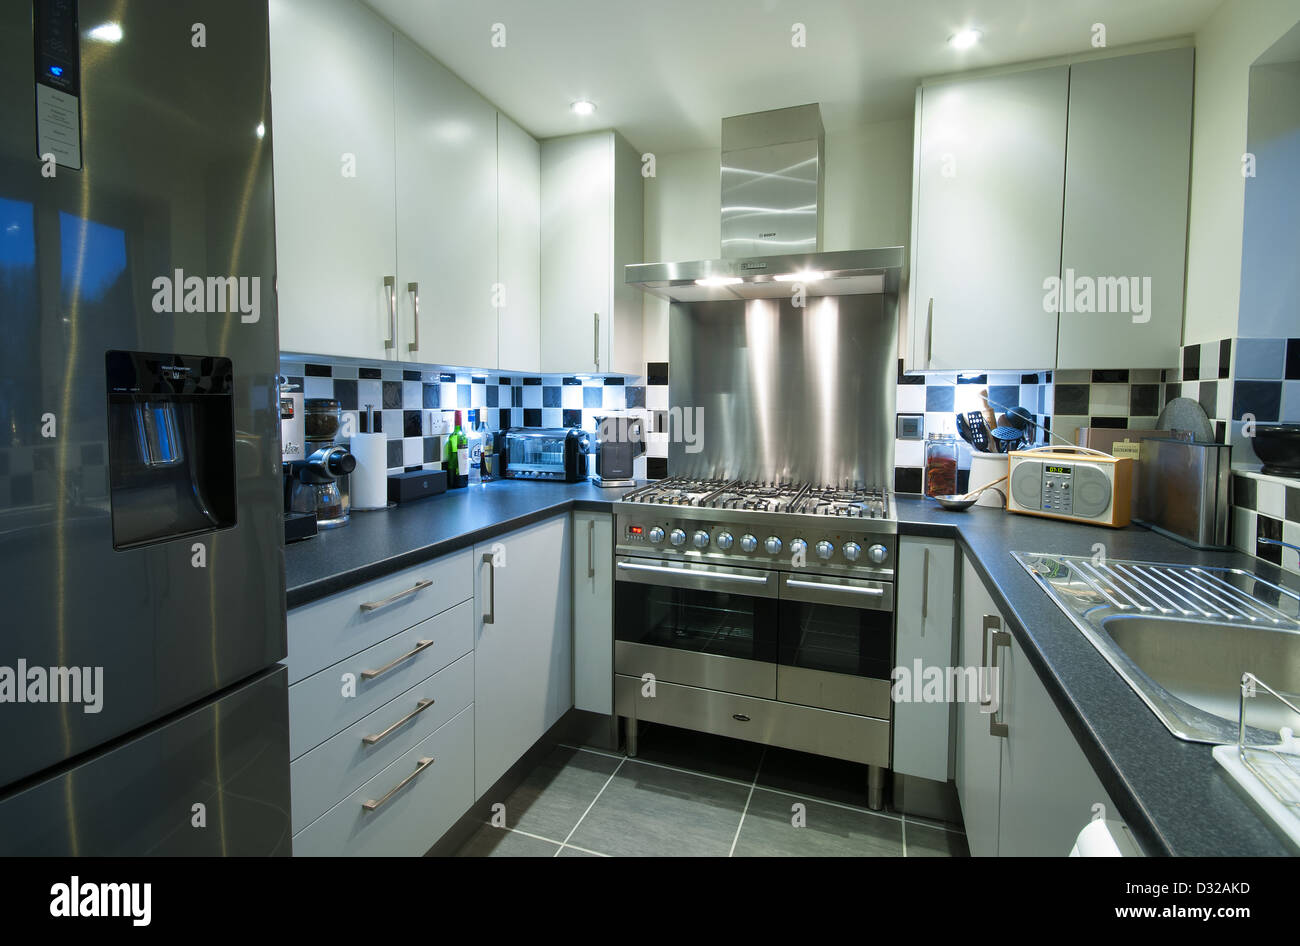 A small, modern domestic kitchen with a fridge-freezer, range cooker and lots of storage space. UK, 2013. Stock Photo